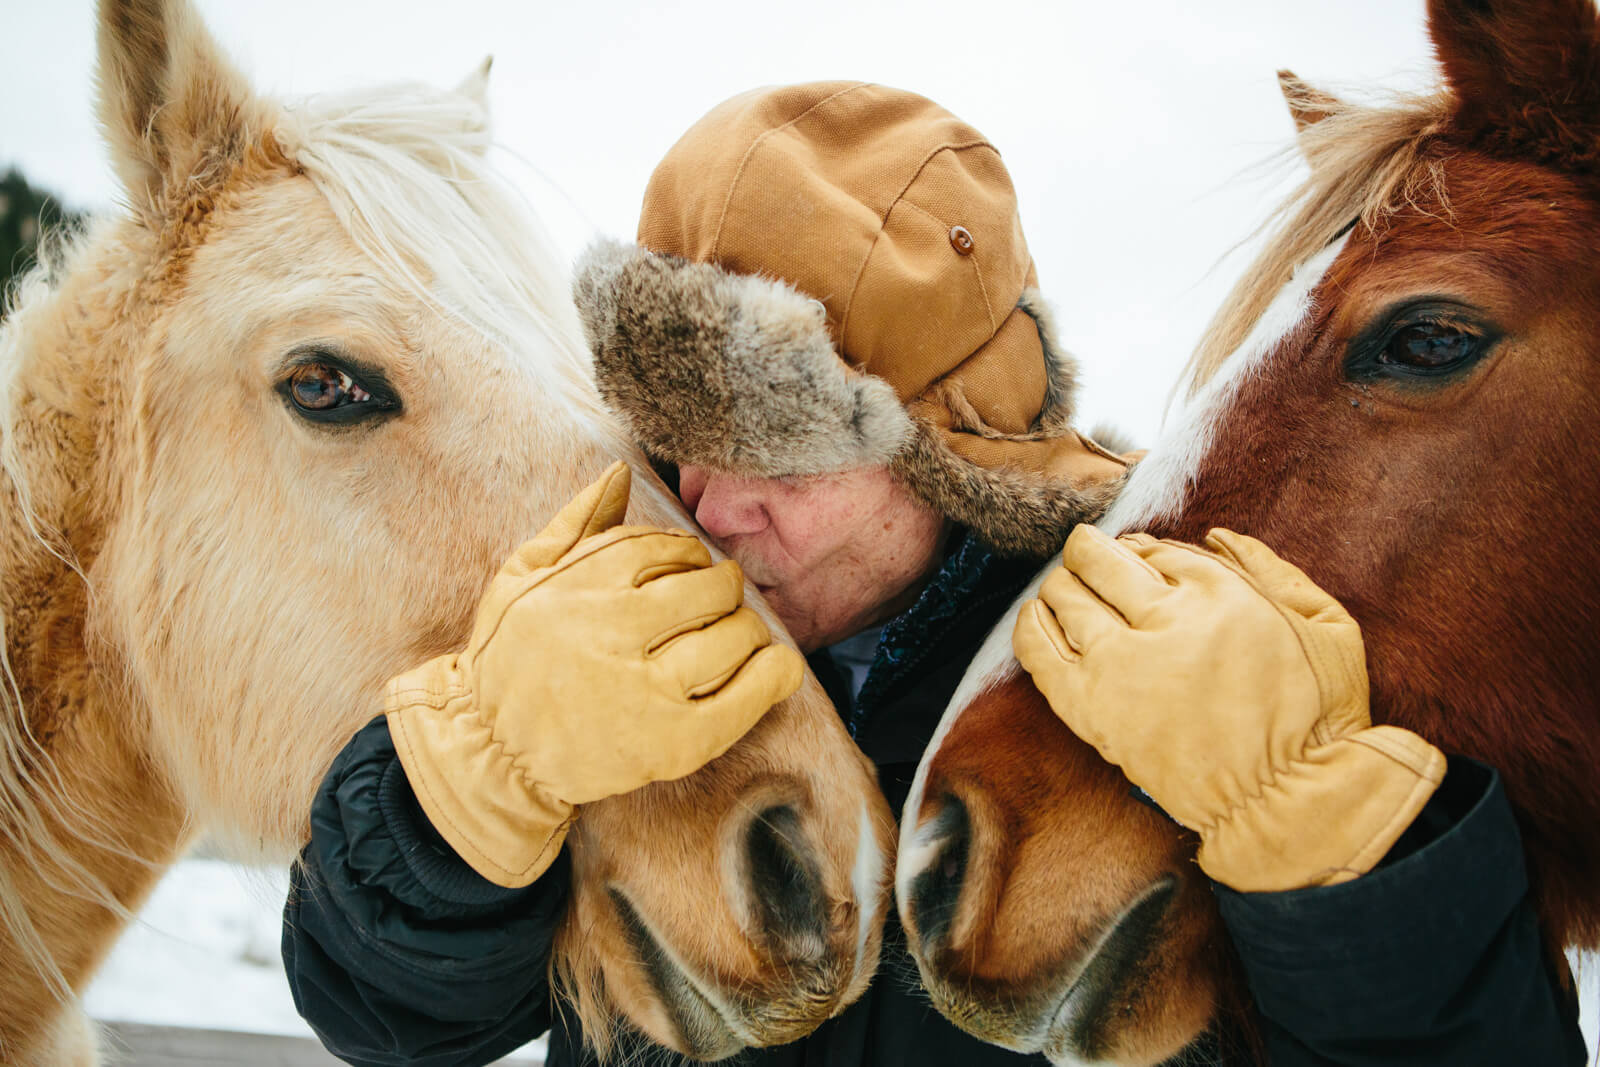 Author James Lee Burke embraces his two horses and kisses the nose of one at his home in Lolo Montana